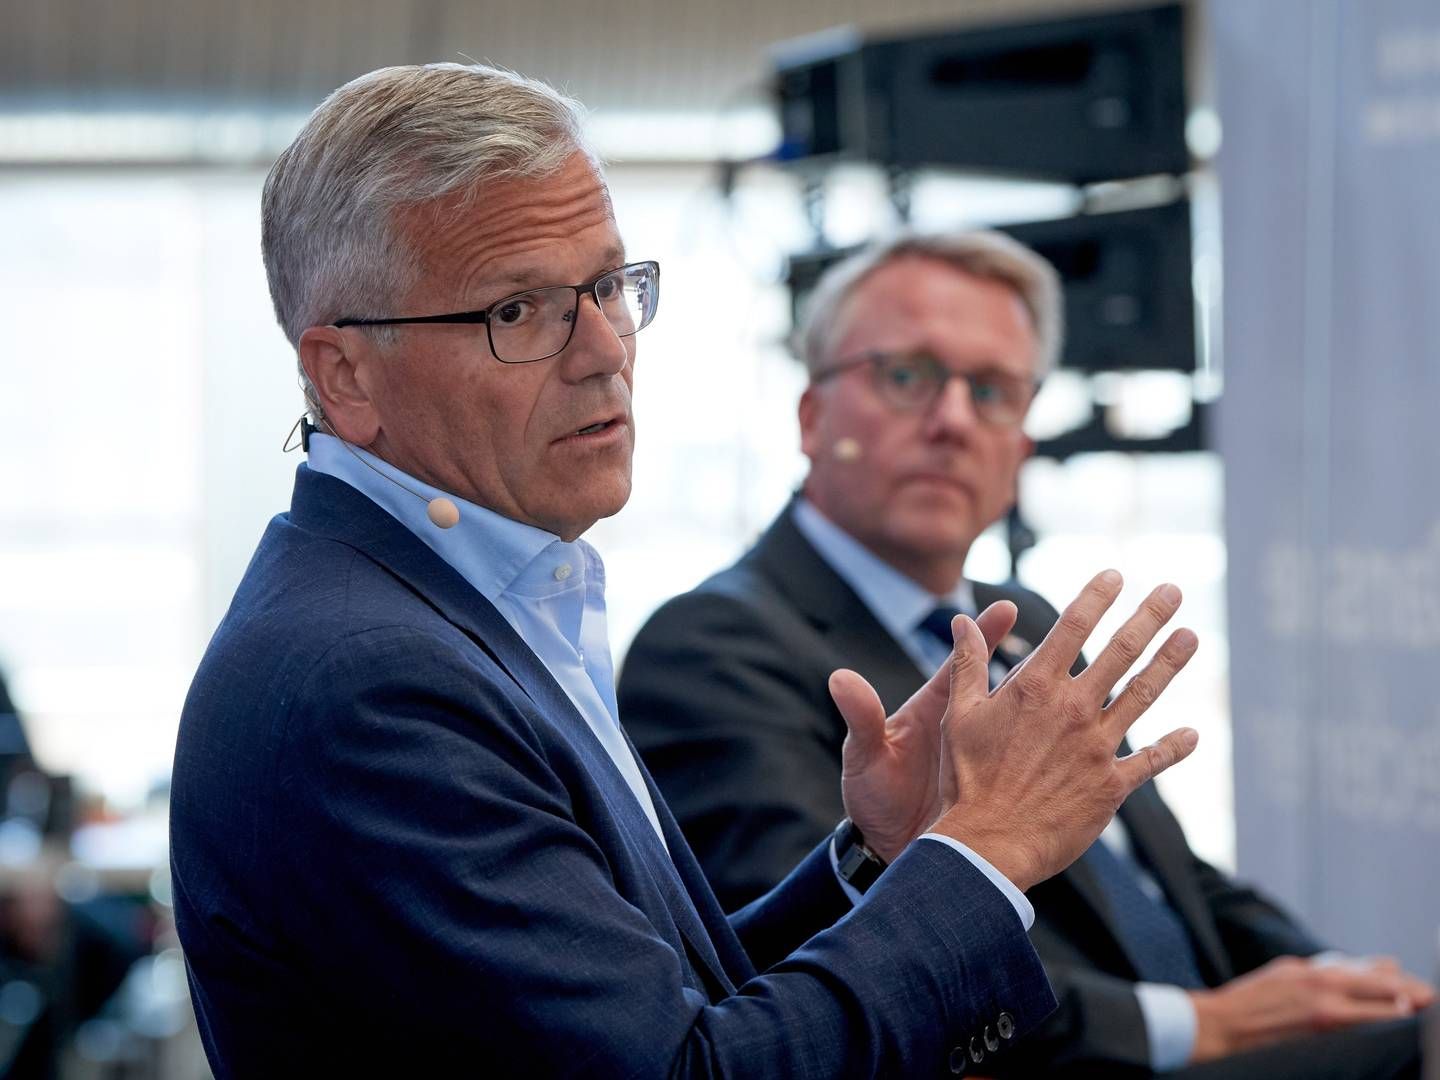 ”You cannot equate China with Russia. The dynamics are very different. It represents a rational government that has an agenda for its country that is not simply about beating up the neighbor," states Maersk's CEO, Vincent Clerc. | Photo: Carsten Lundager / Danske Rederier